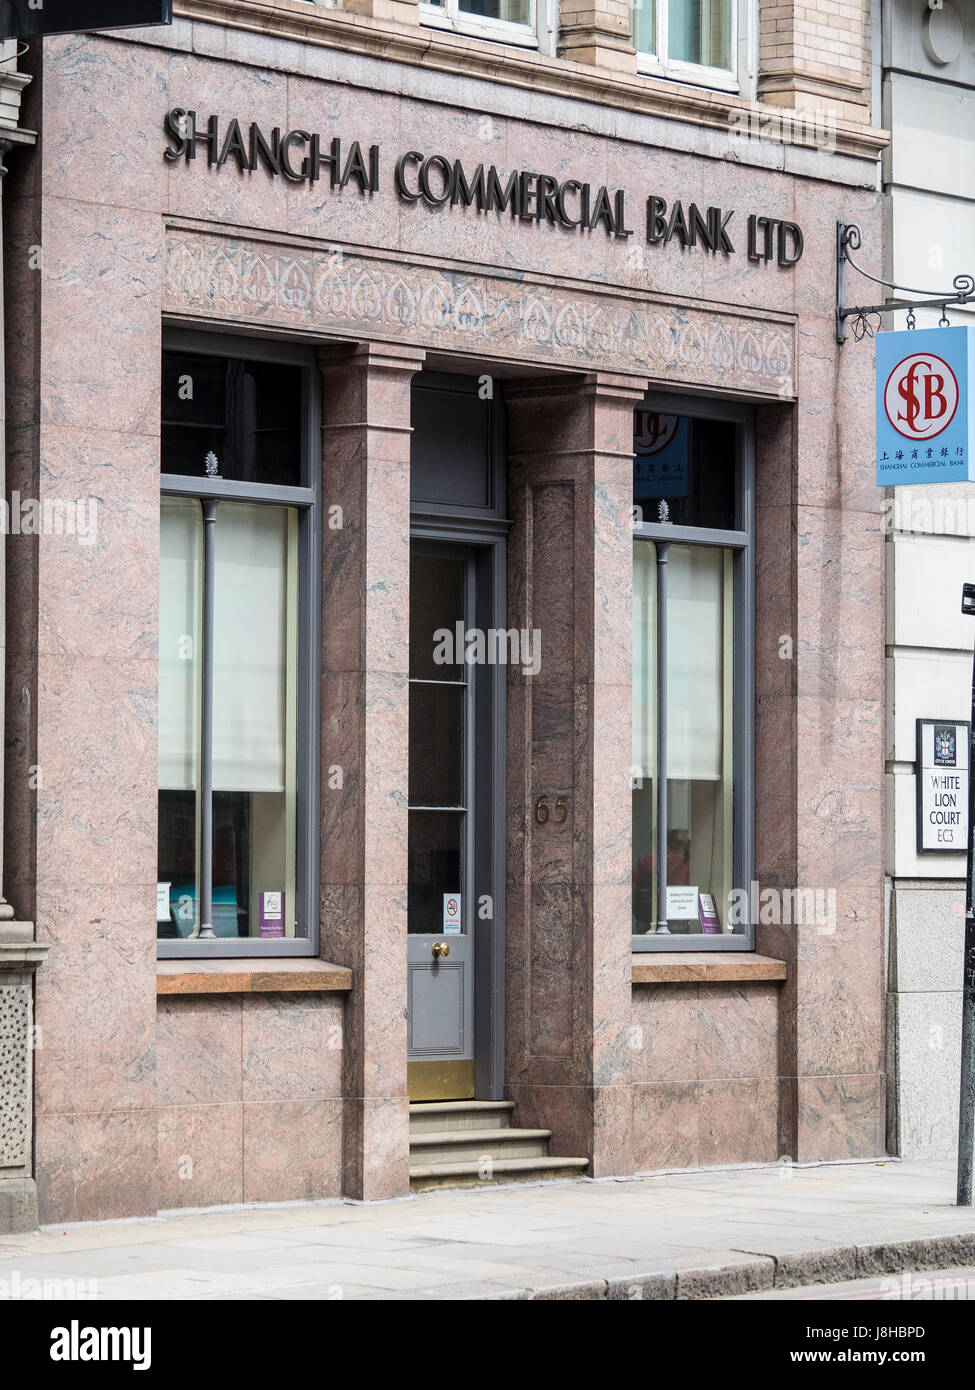 Shanghai Commercial Bank offices on Cornhill in the City of London Financial District Stock Photo